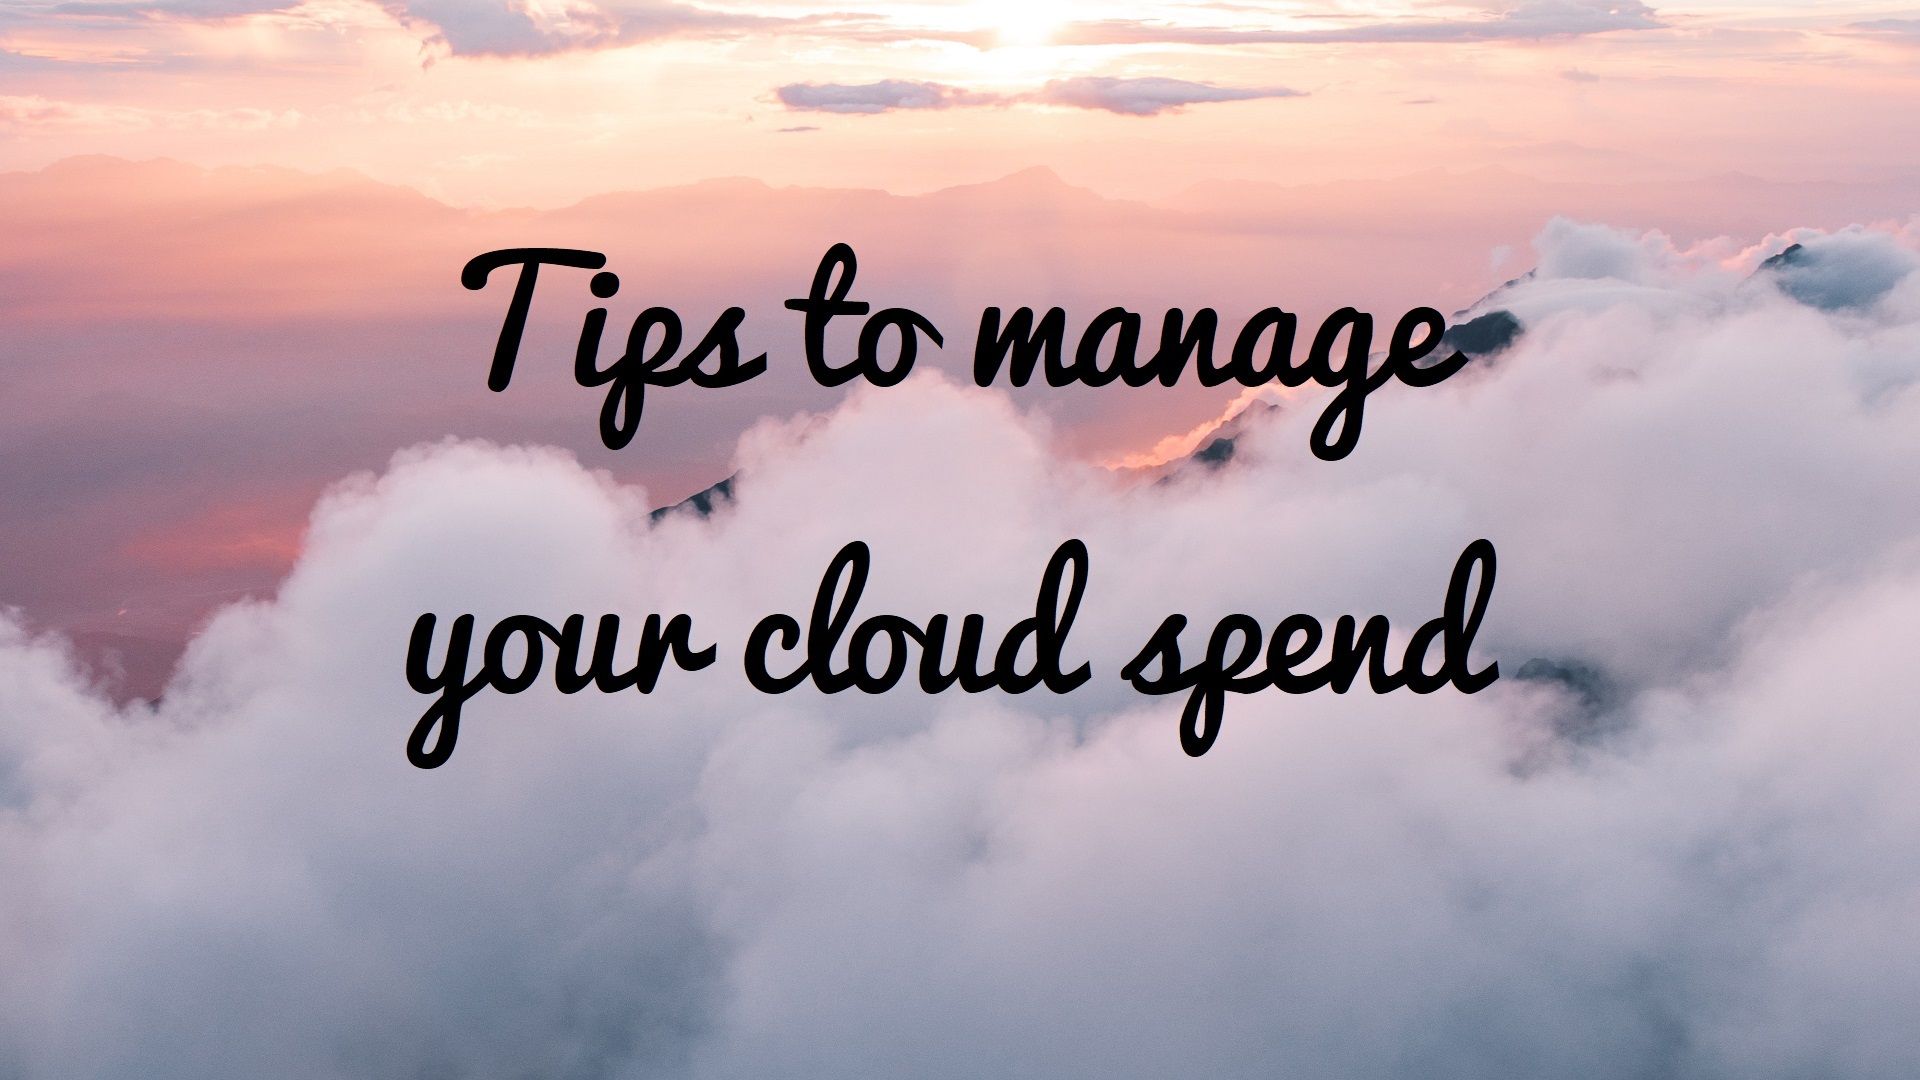 Keeping on top of your cloud spend (Azure)